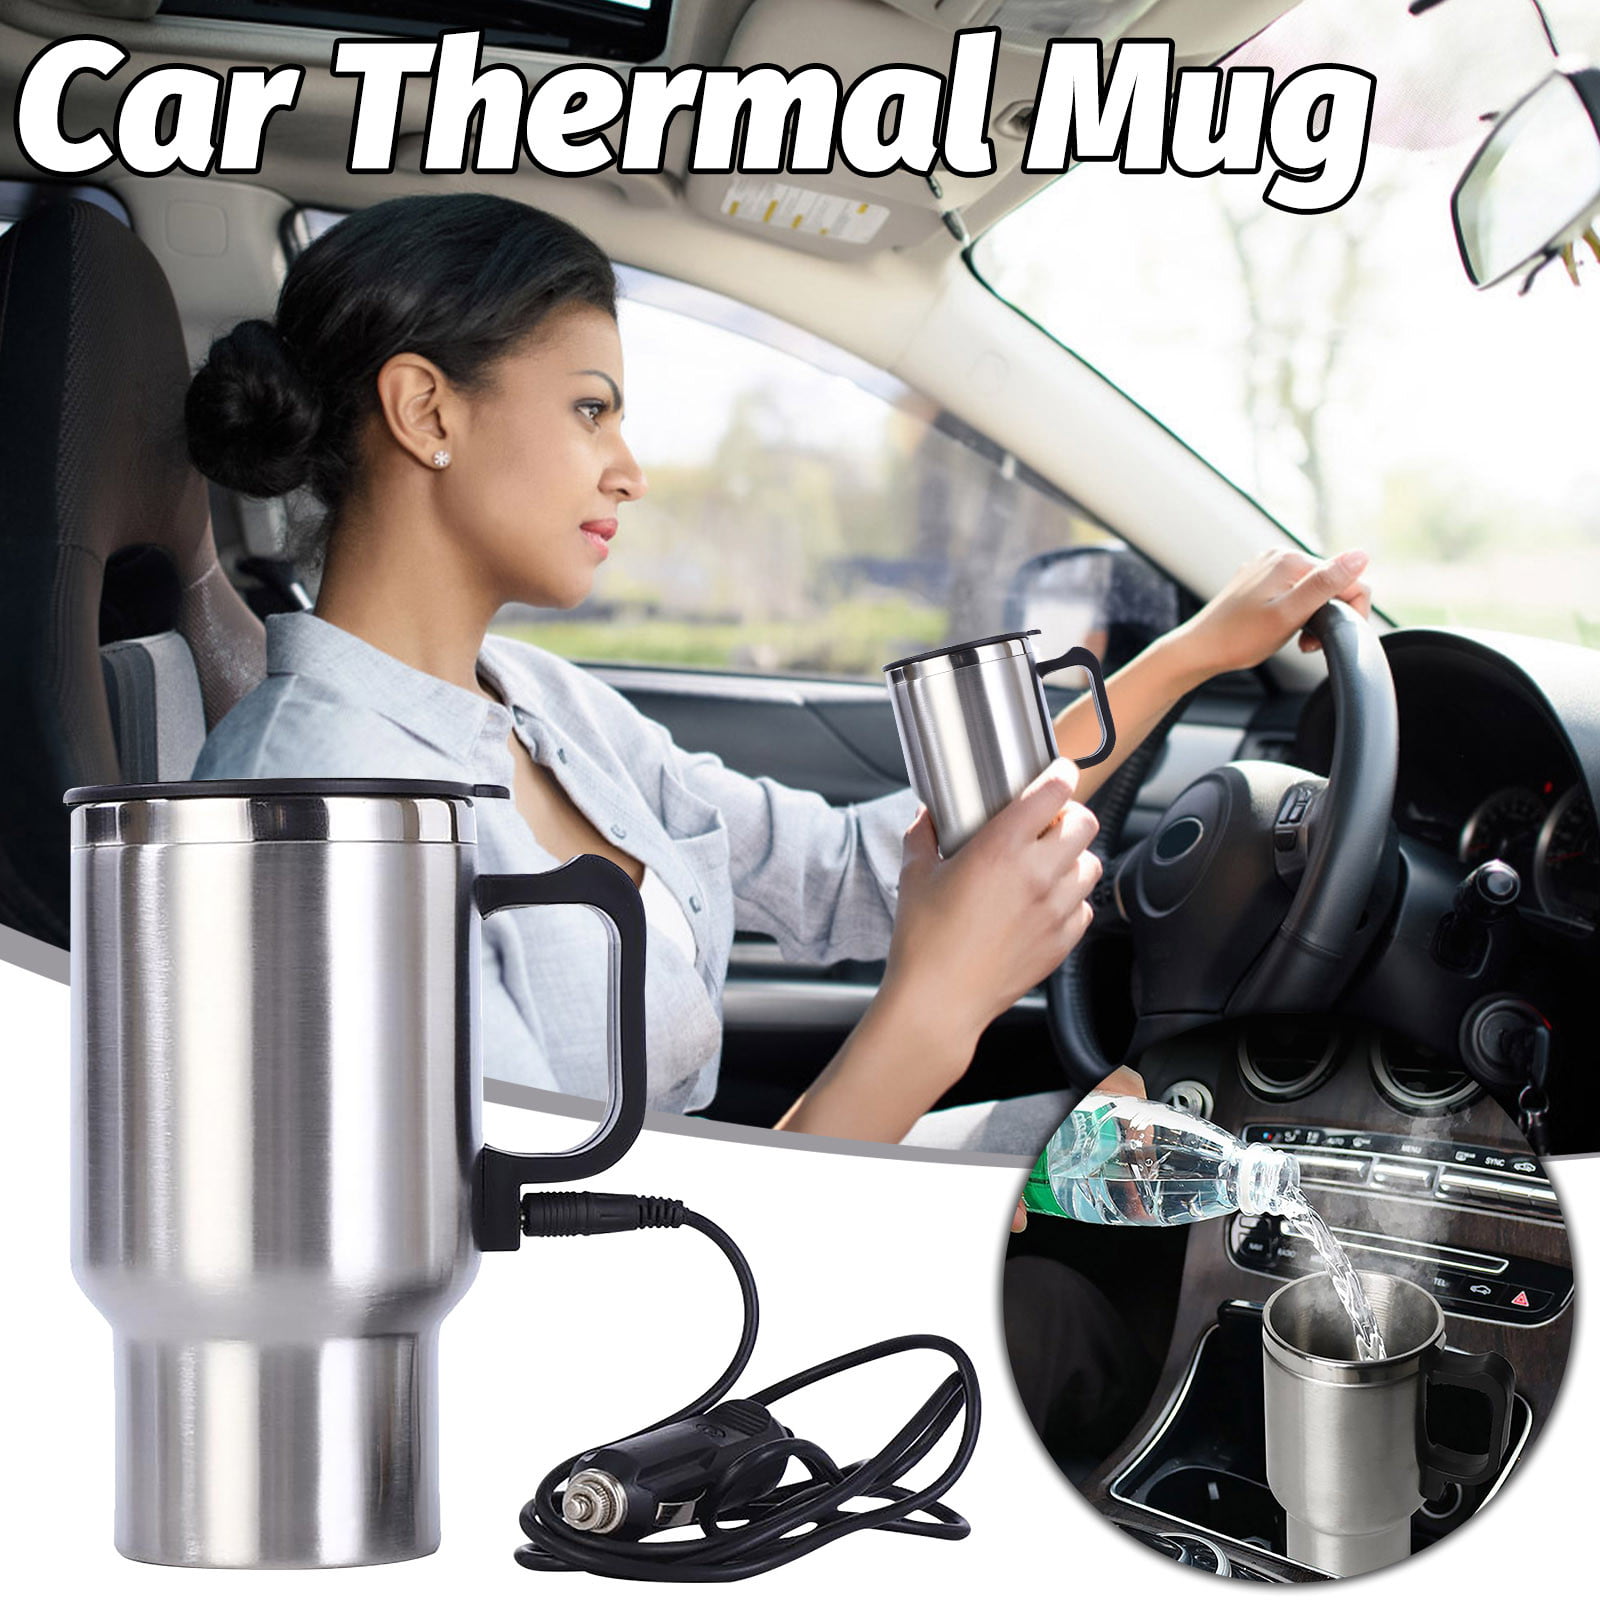 Heated Travel Mug, 12V 450ml Electric INCAR Stainless Steel Travel Heating Cup Coffee Tea Car Cup Mug with Anti-Spill Lid Car Electric Kettle for